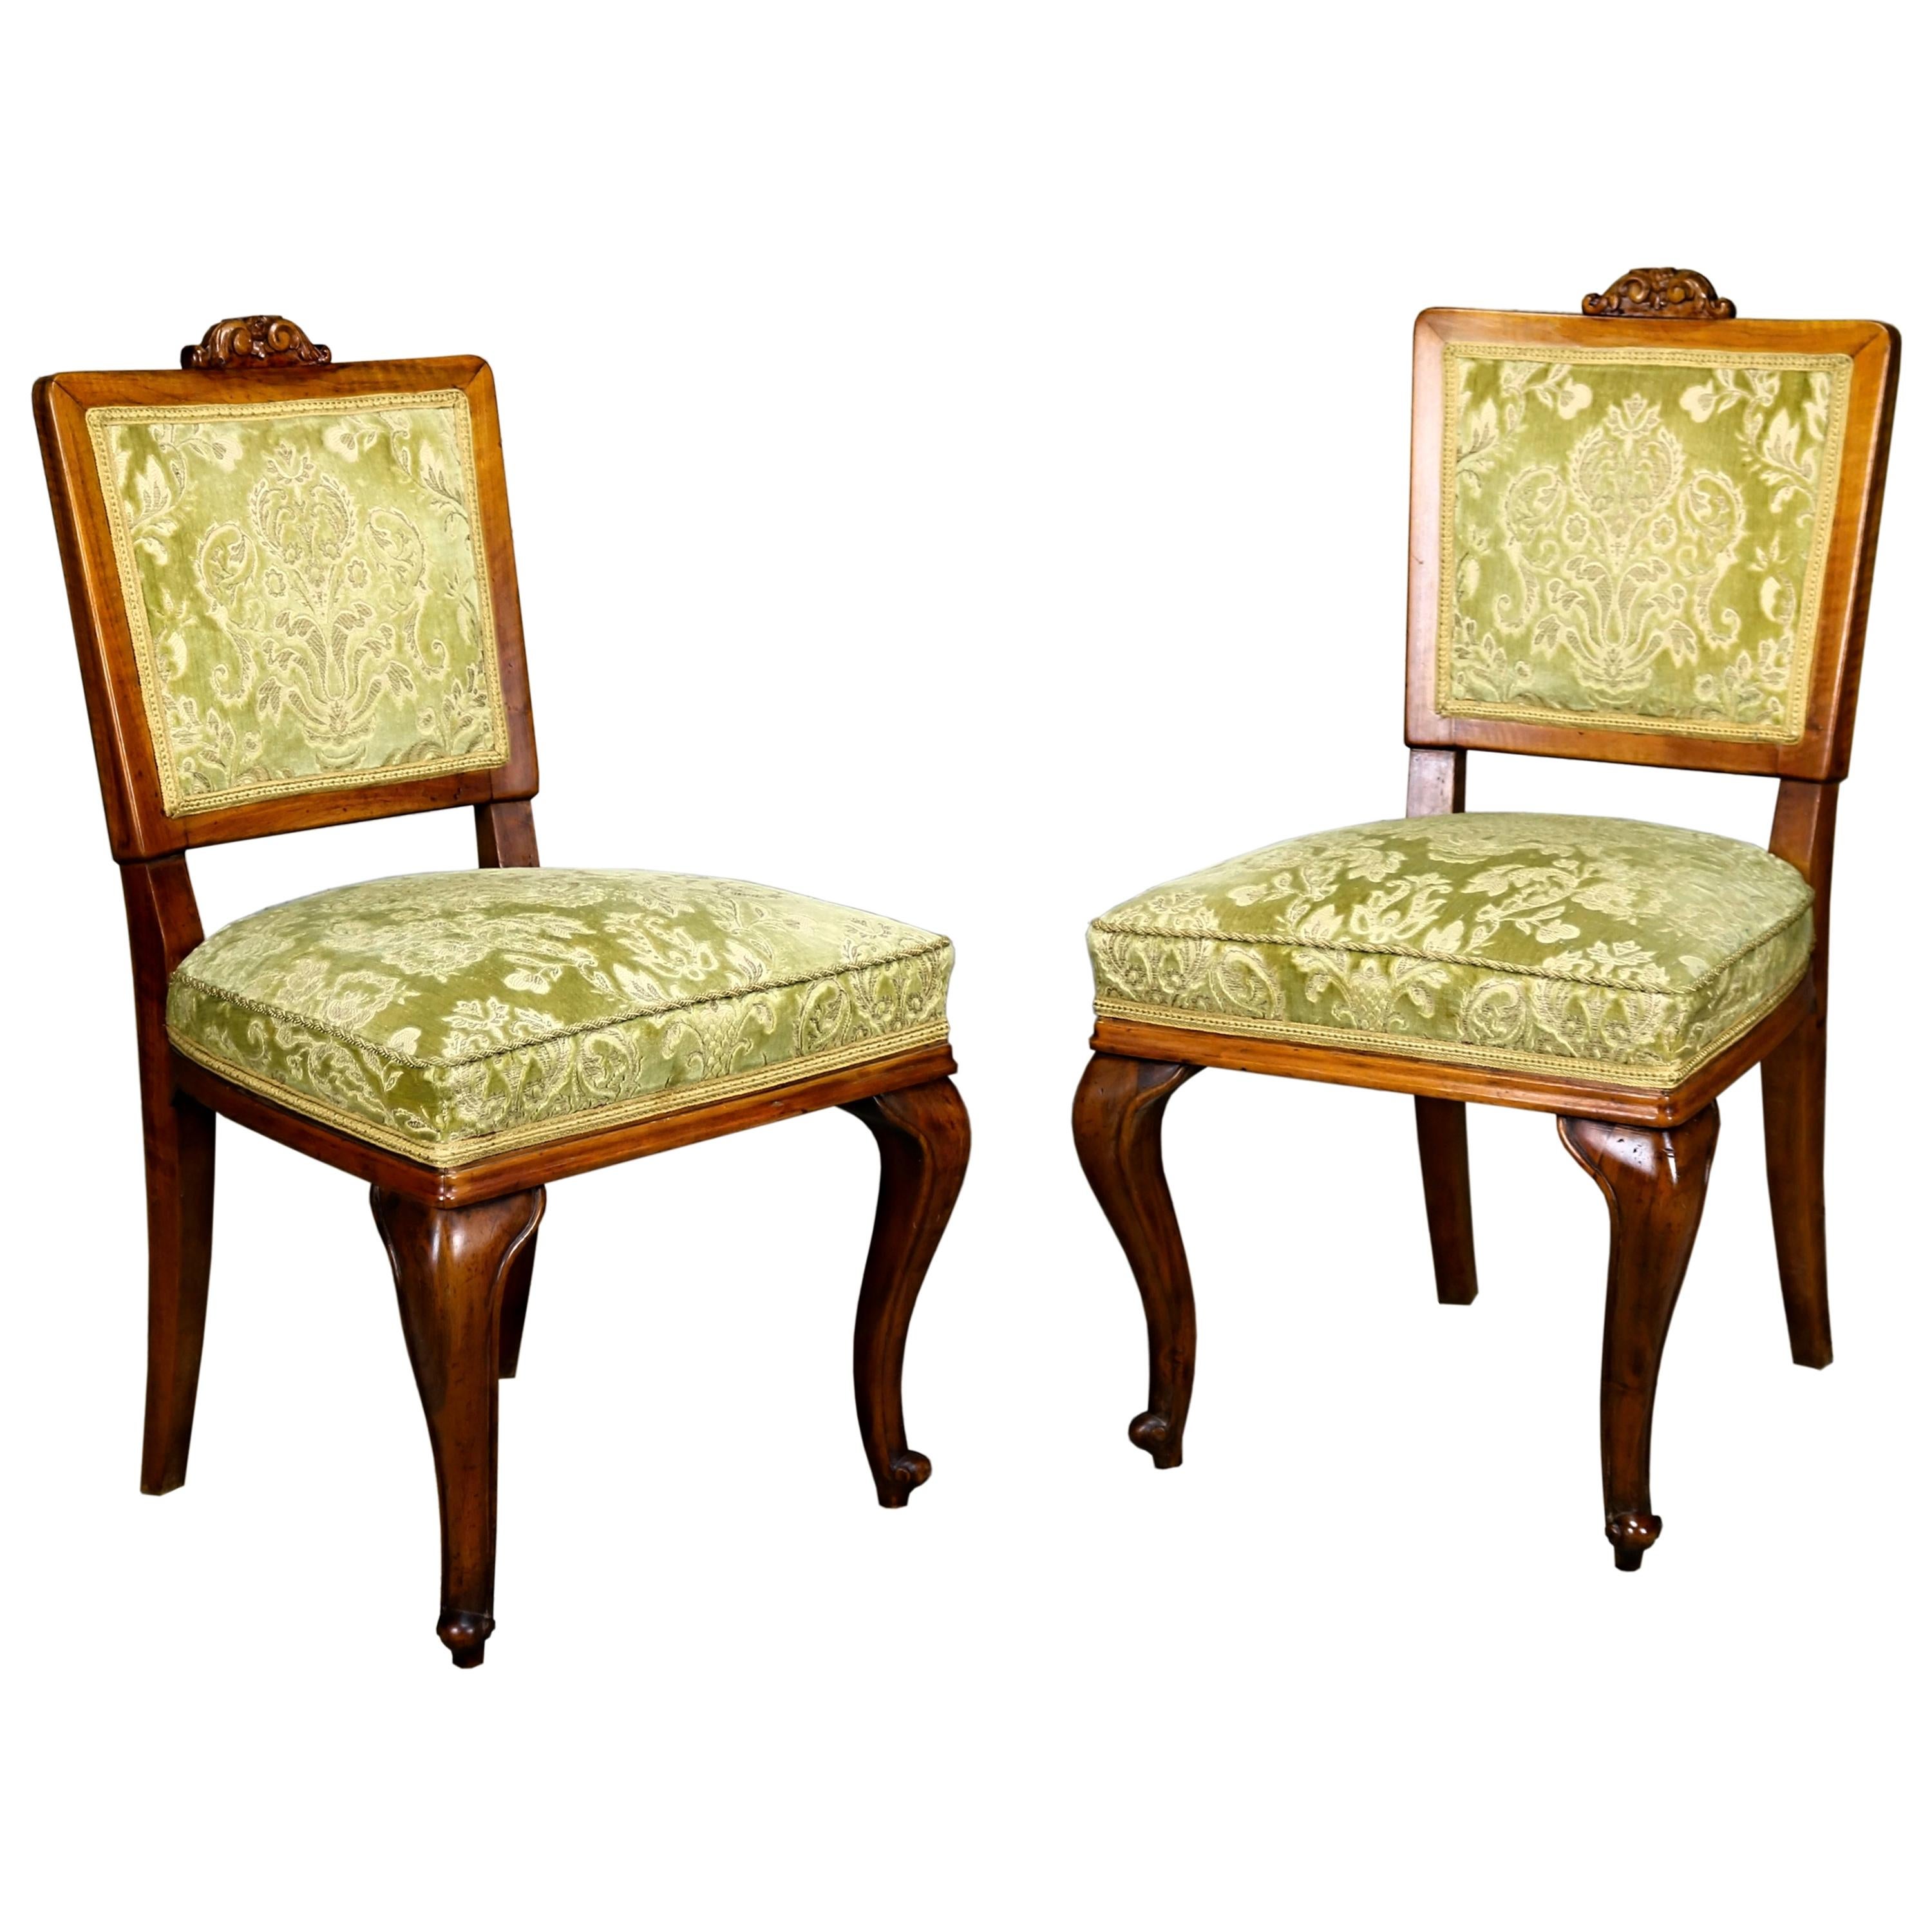 Pair of Fruitwood Side Chairs, circa 1900